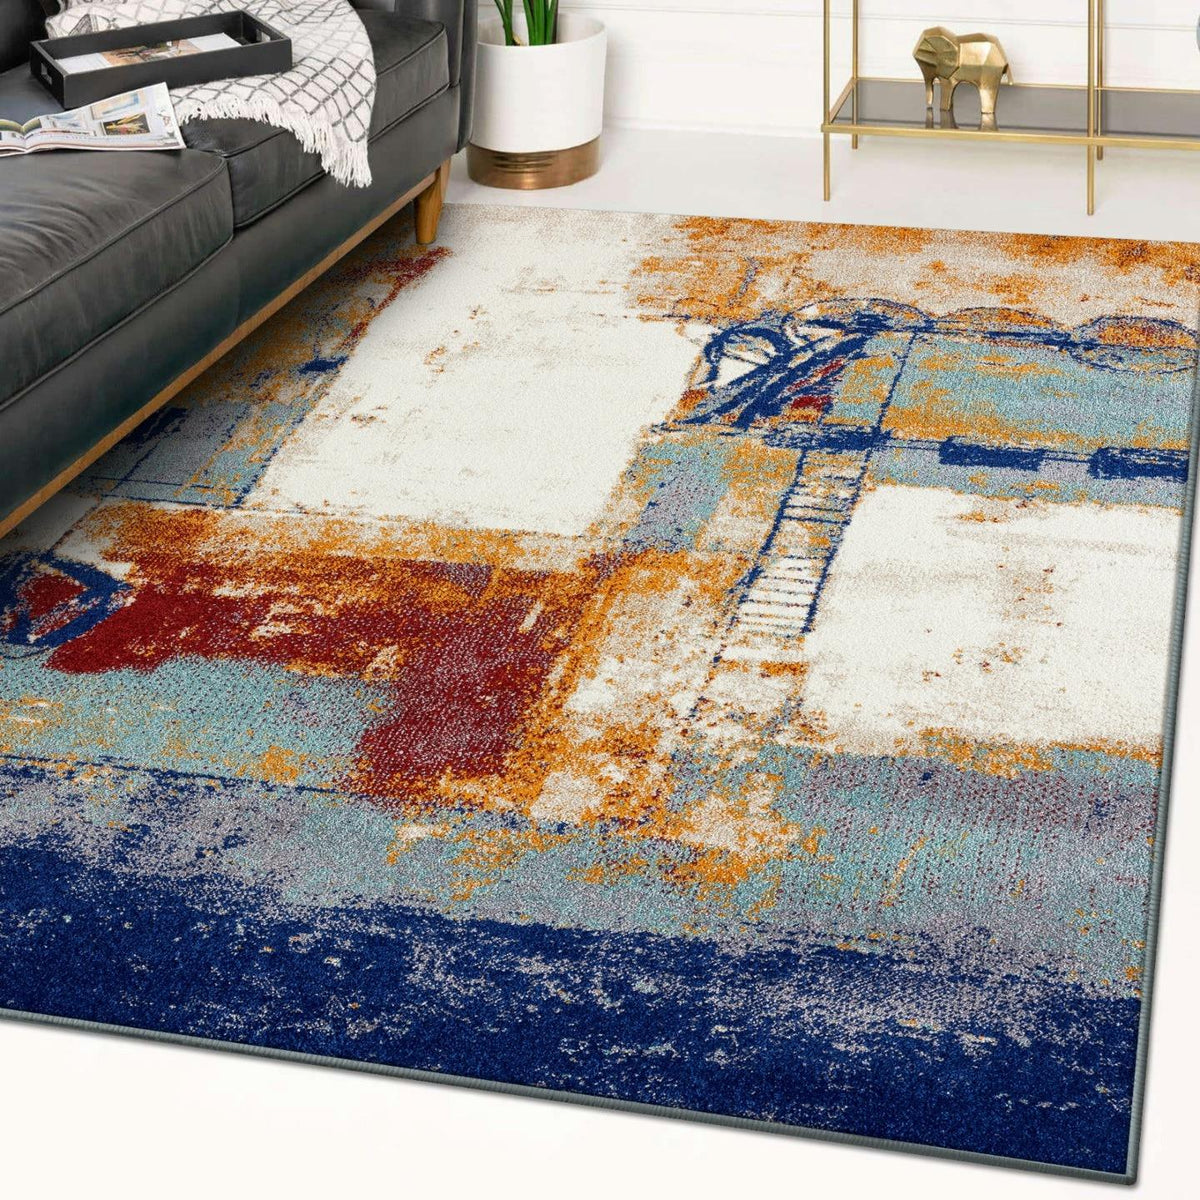 Industrial Living Room Rug Multi Color Abstract Rug Cotton Blend